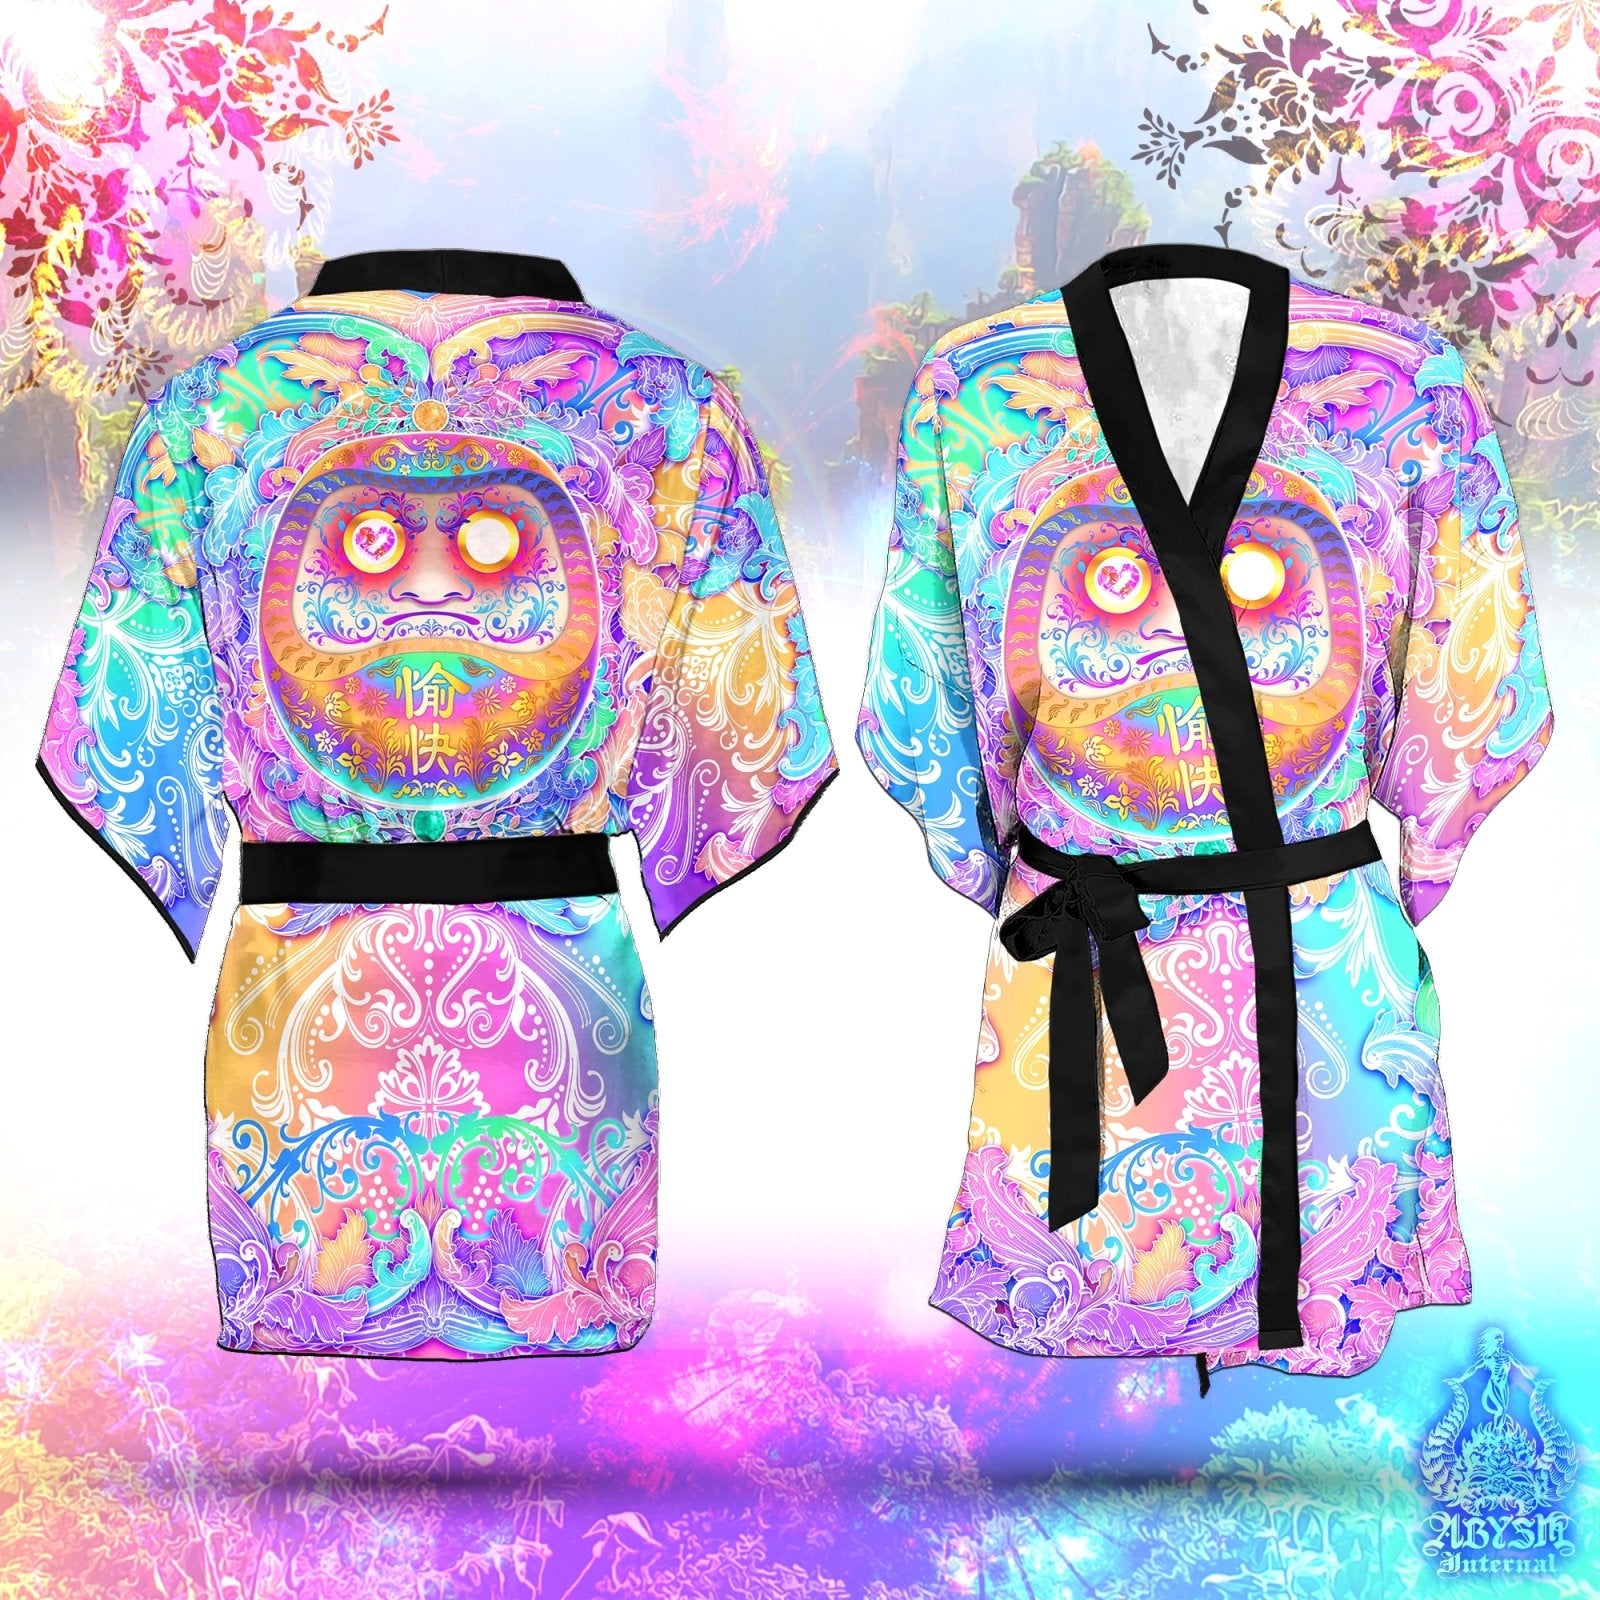 Daruma Cover Up, Beach Rave Outfit, Party Kimono, Japanese Summer Festival Robe, Aesthetic Indie and Alternative Clothing, Unisex - Holographic Pastel - Abysm Internal